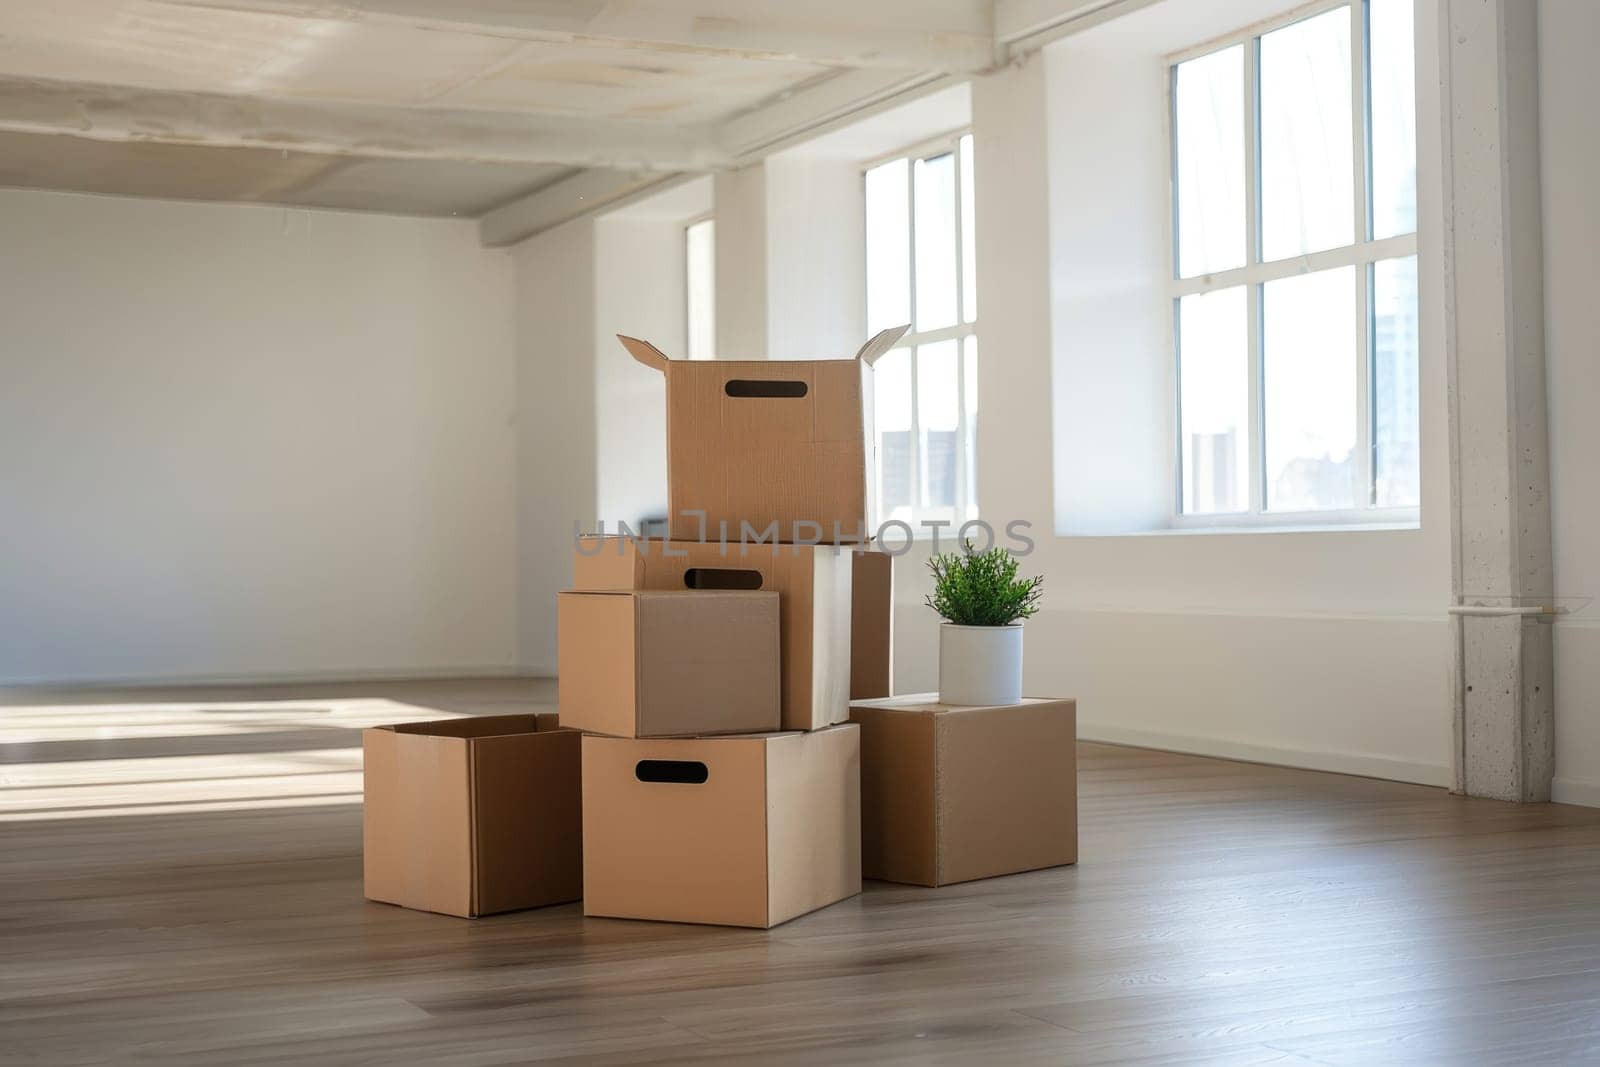 A stack of cardboard boxes and a potted plant are in a room. The boxes are piled on top of each other, and the plant is placed in the middle of the stack. The room appears to be empty